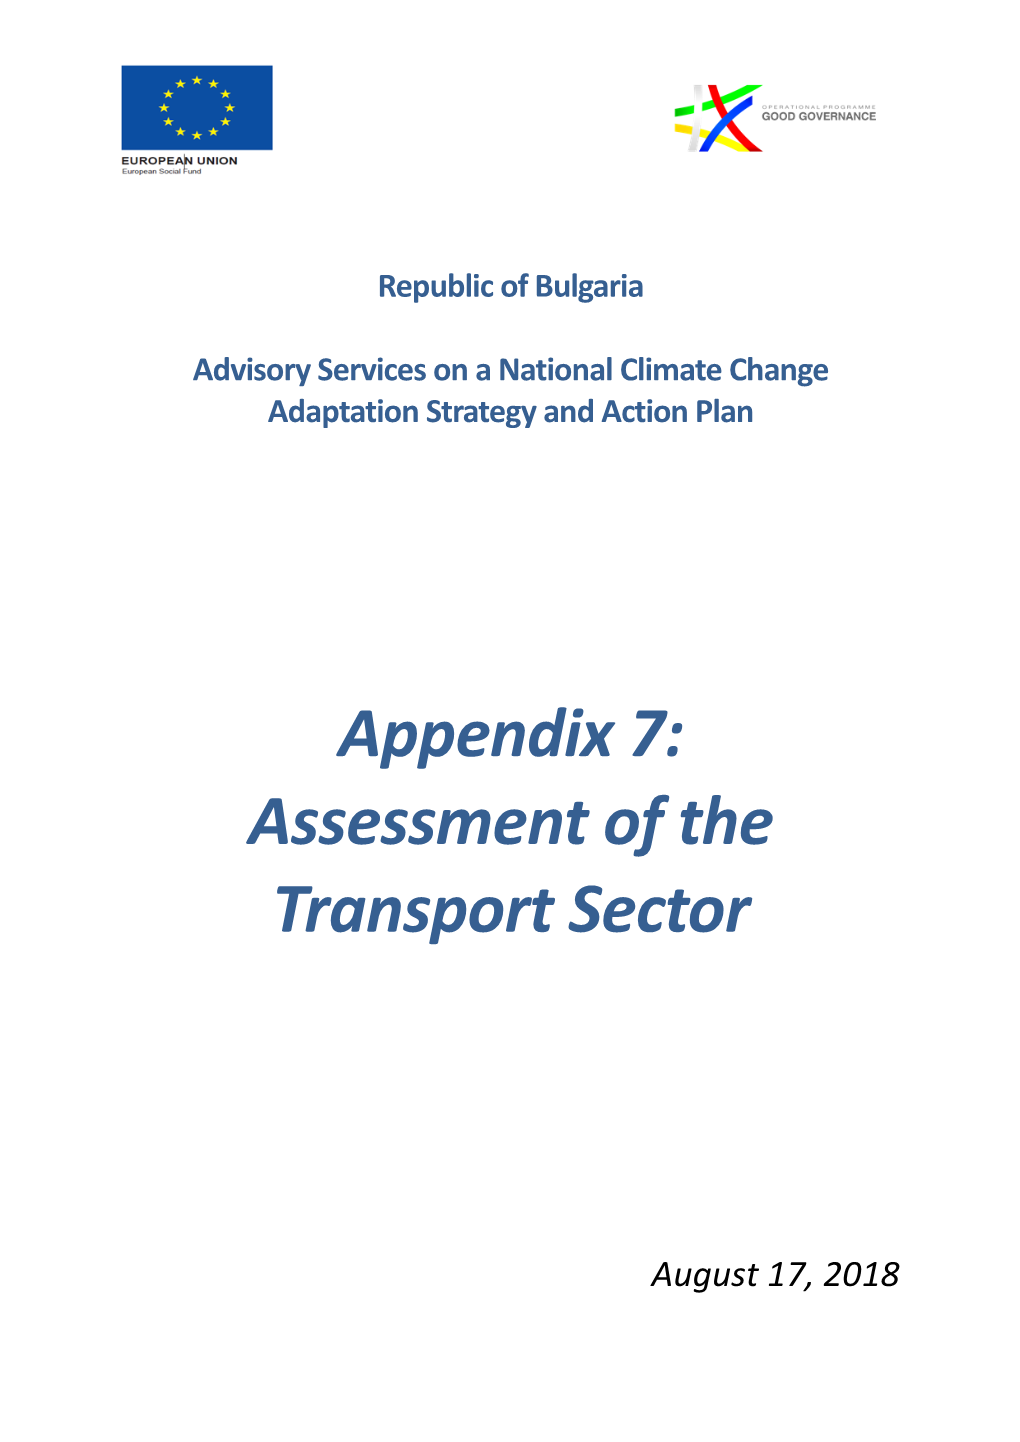 Appendix 7: Assessment of the Transport Sector